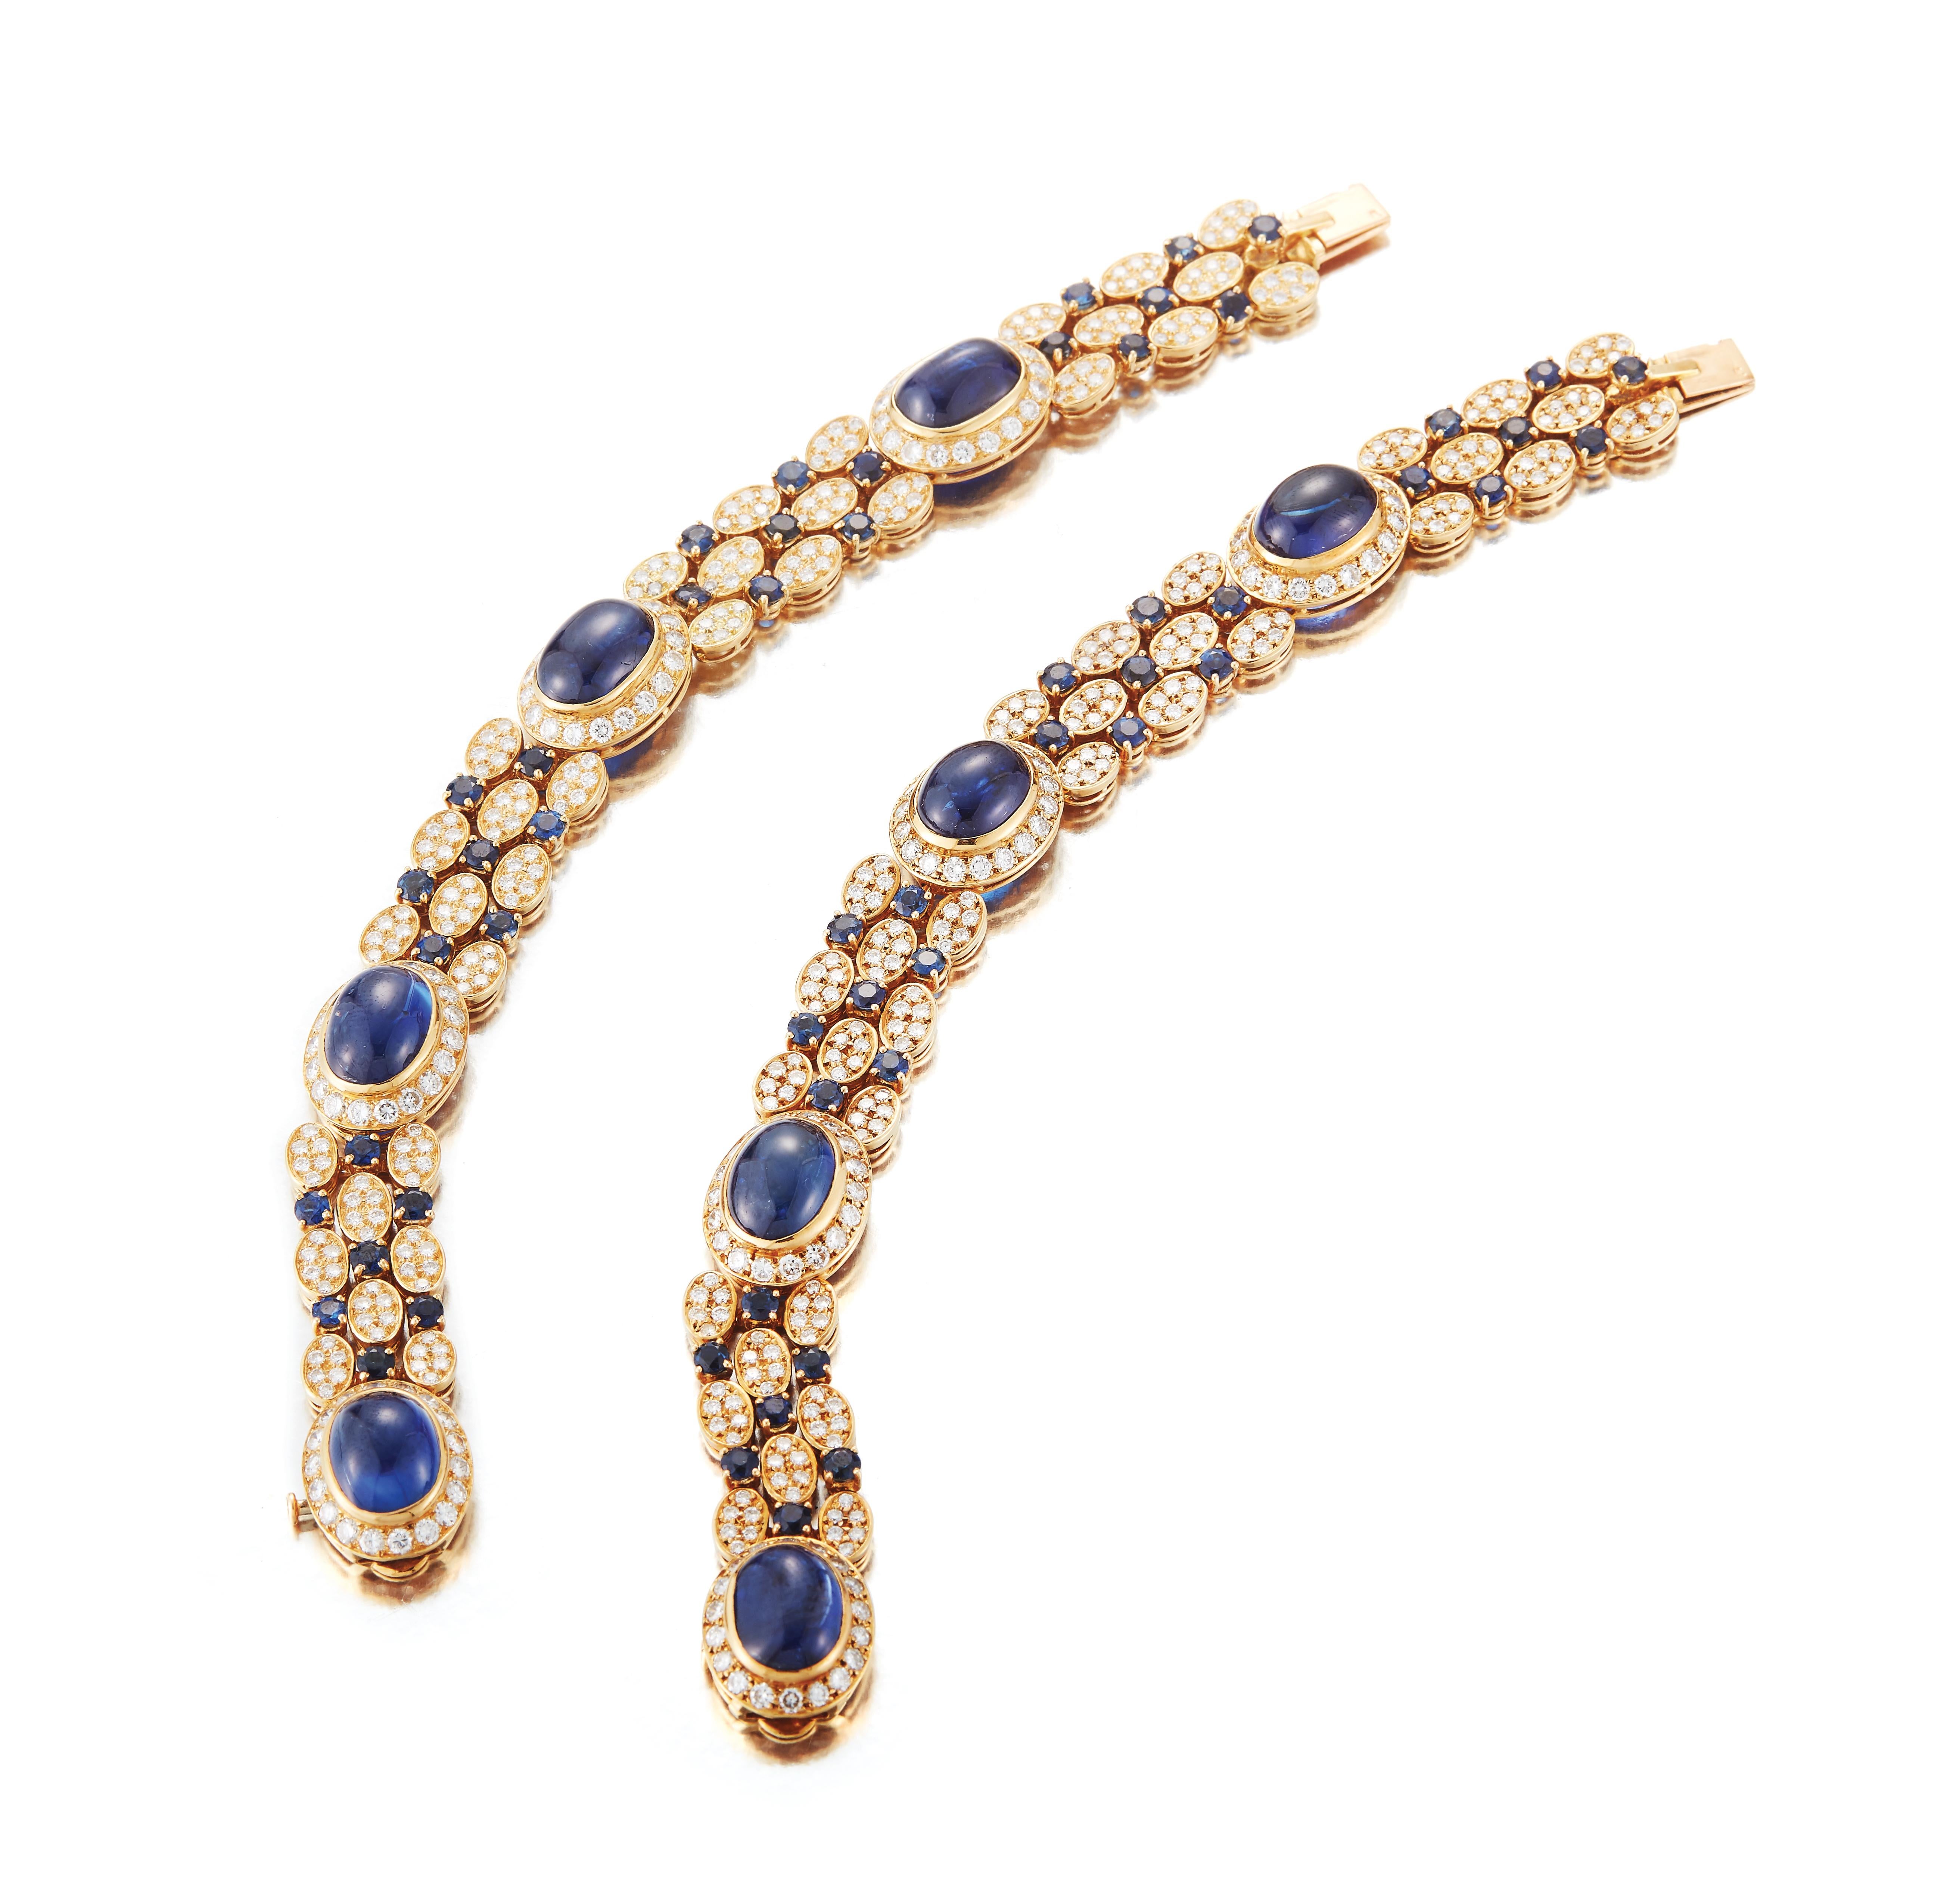 A gorgeous cabochon sapphire necklace and earring set. 

The stunningly long necklace which can be separated into two bracelets, showcases a unique layout of sapphires. 

Both necklace and earrings showcase tassels of fine diamonds and sapphires.